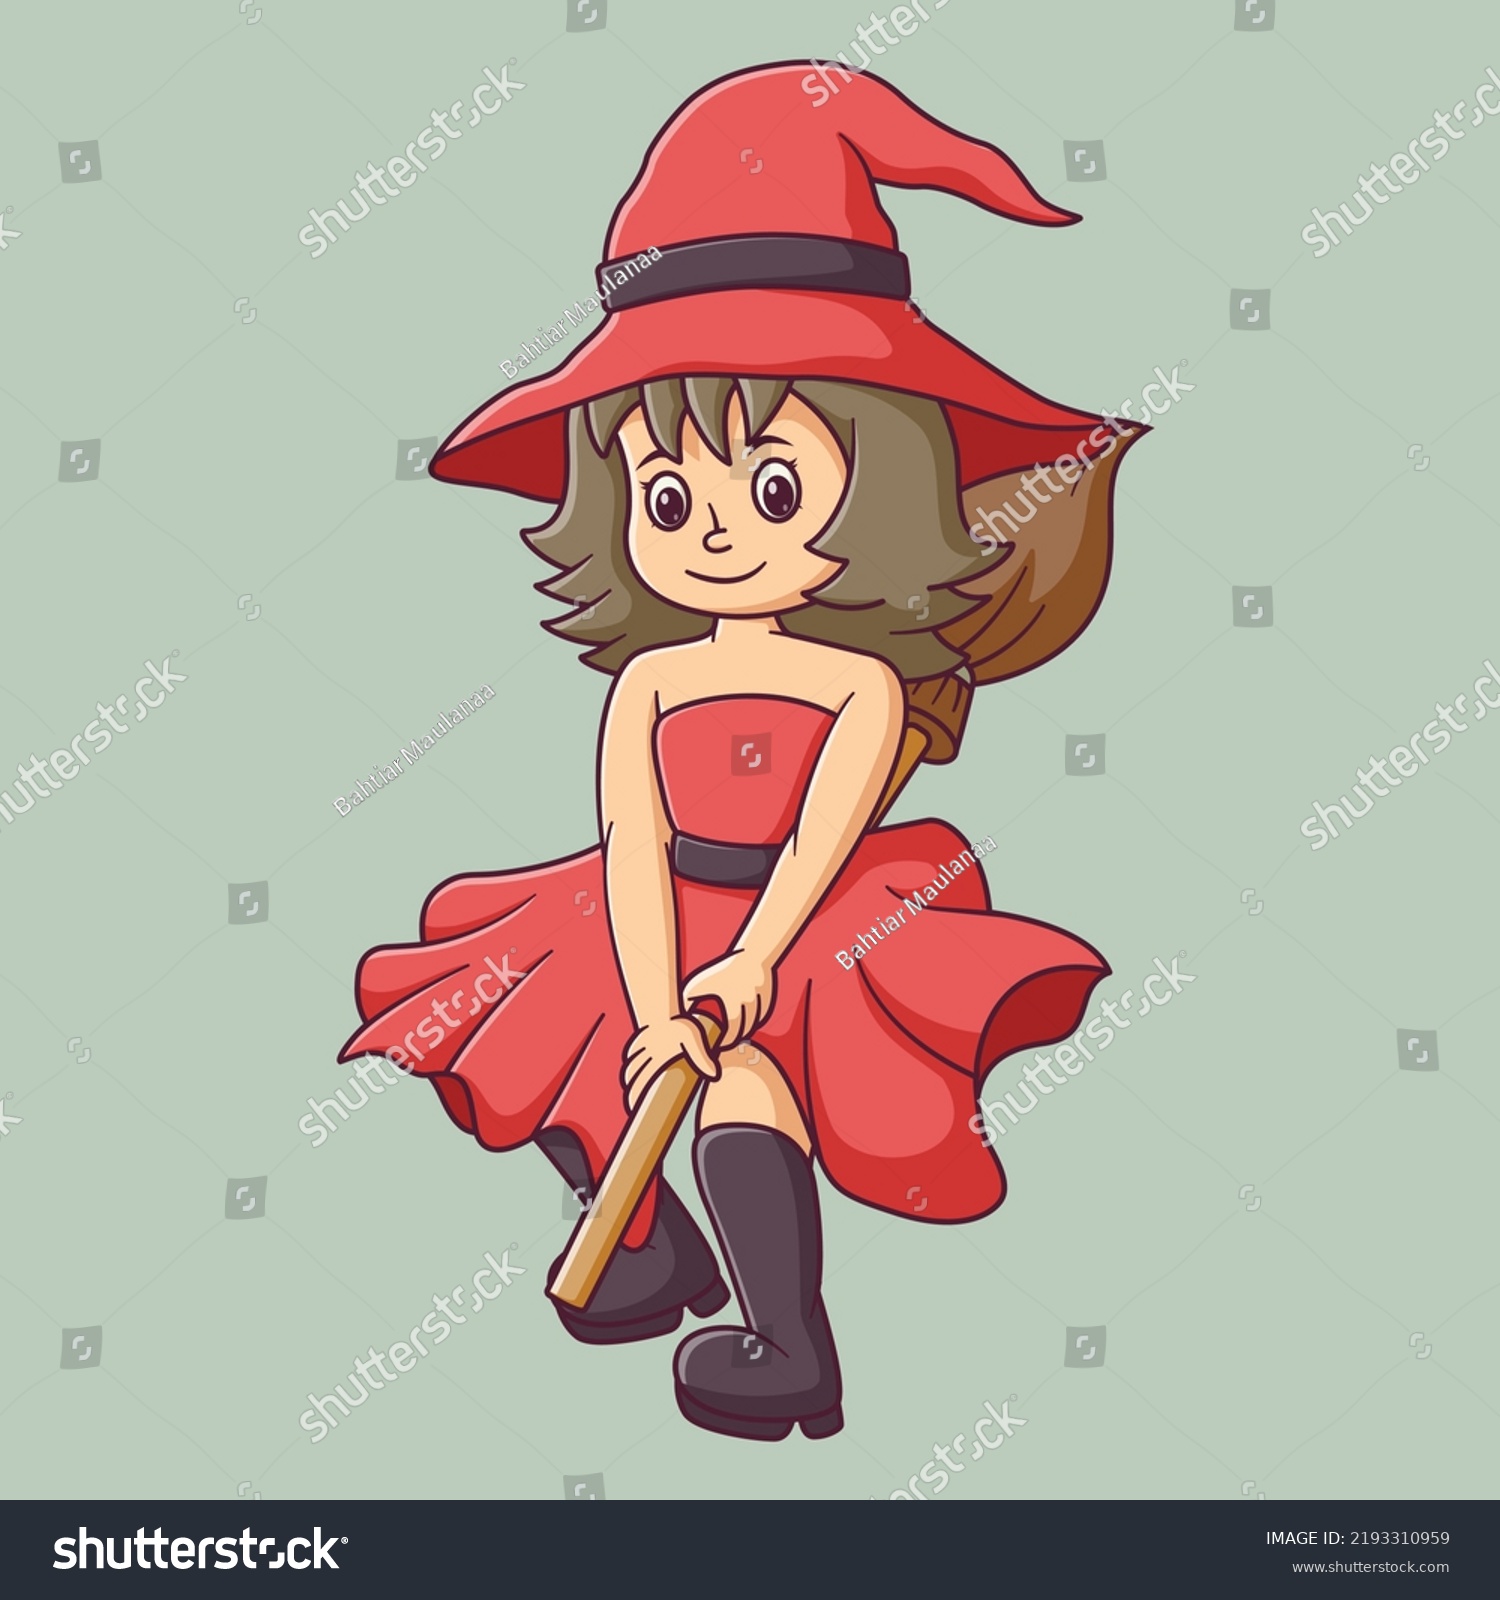 Cartoon Flying Red Witch Riding Broom Stock Vector Royalty Free 2193310959 Shutterstock 